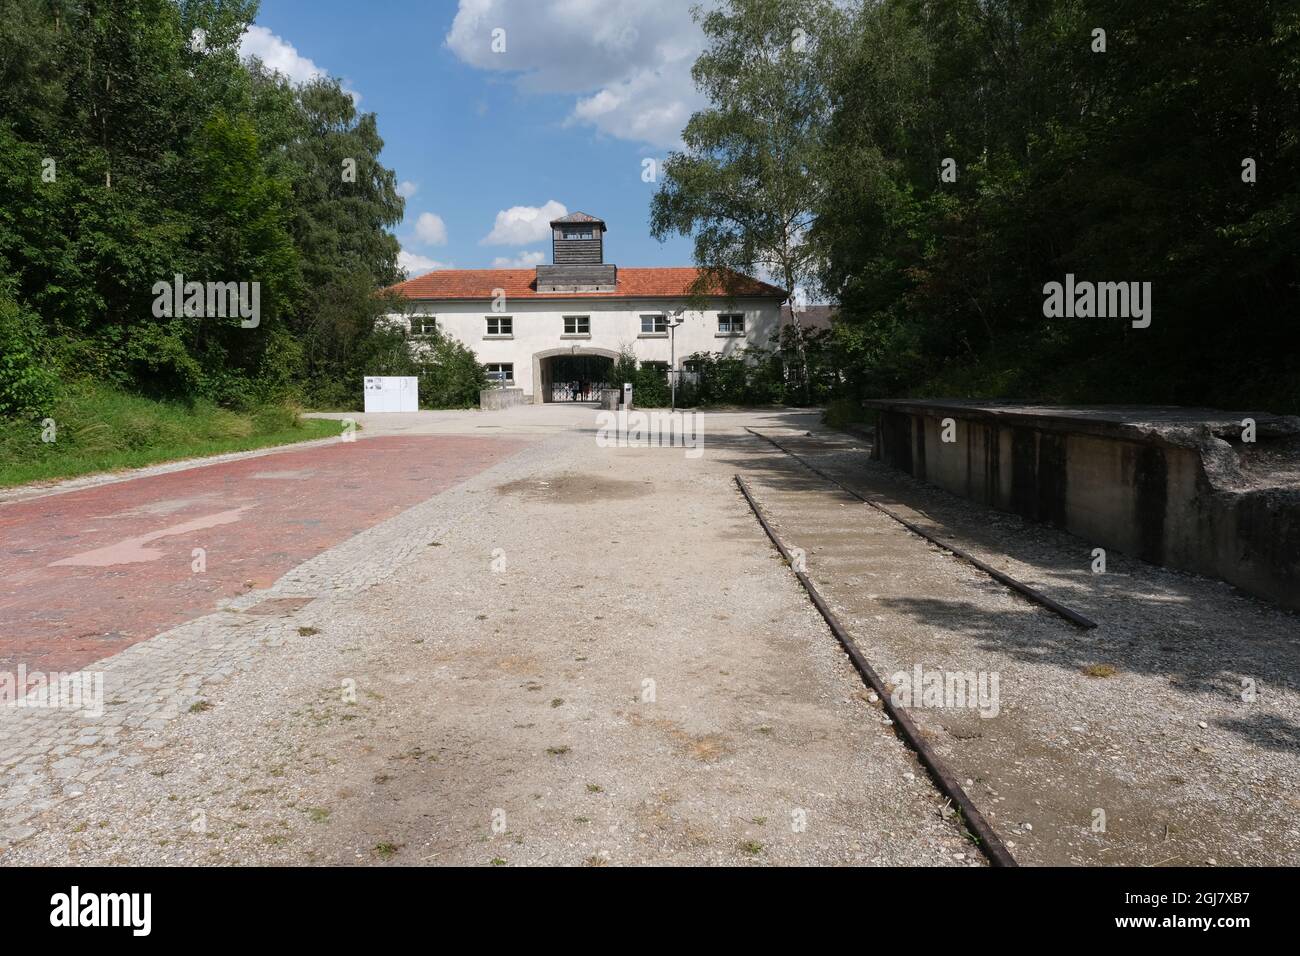 Dachau, Germany - August 11, 2021: Concentration camp memorial site. What remain of the end of the railway of the prisoners train. Entry to the camp. Stock Photo